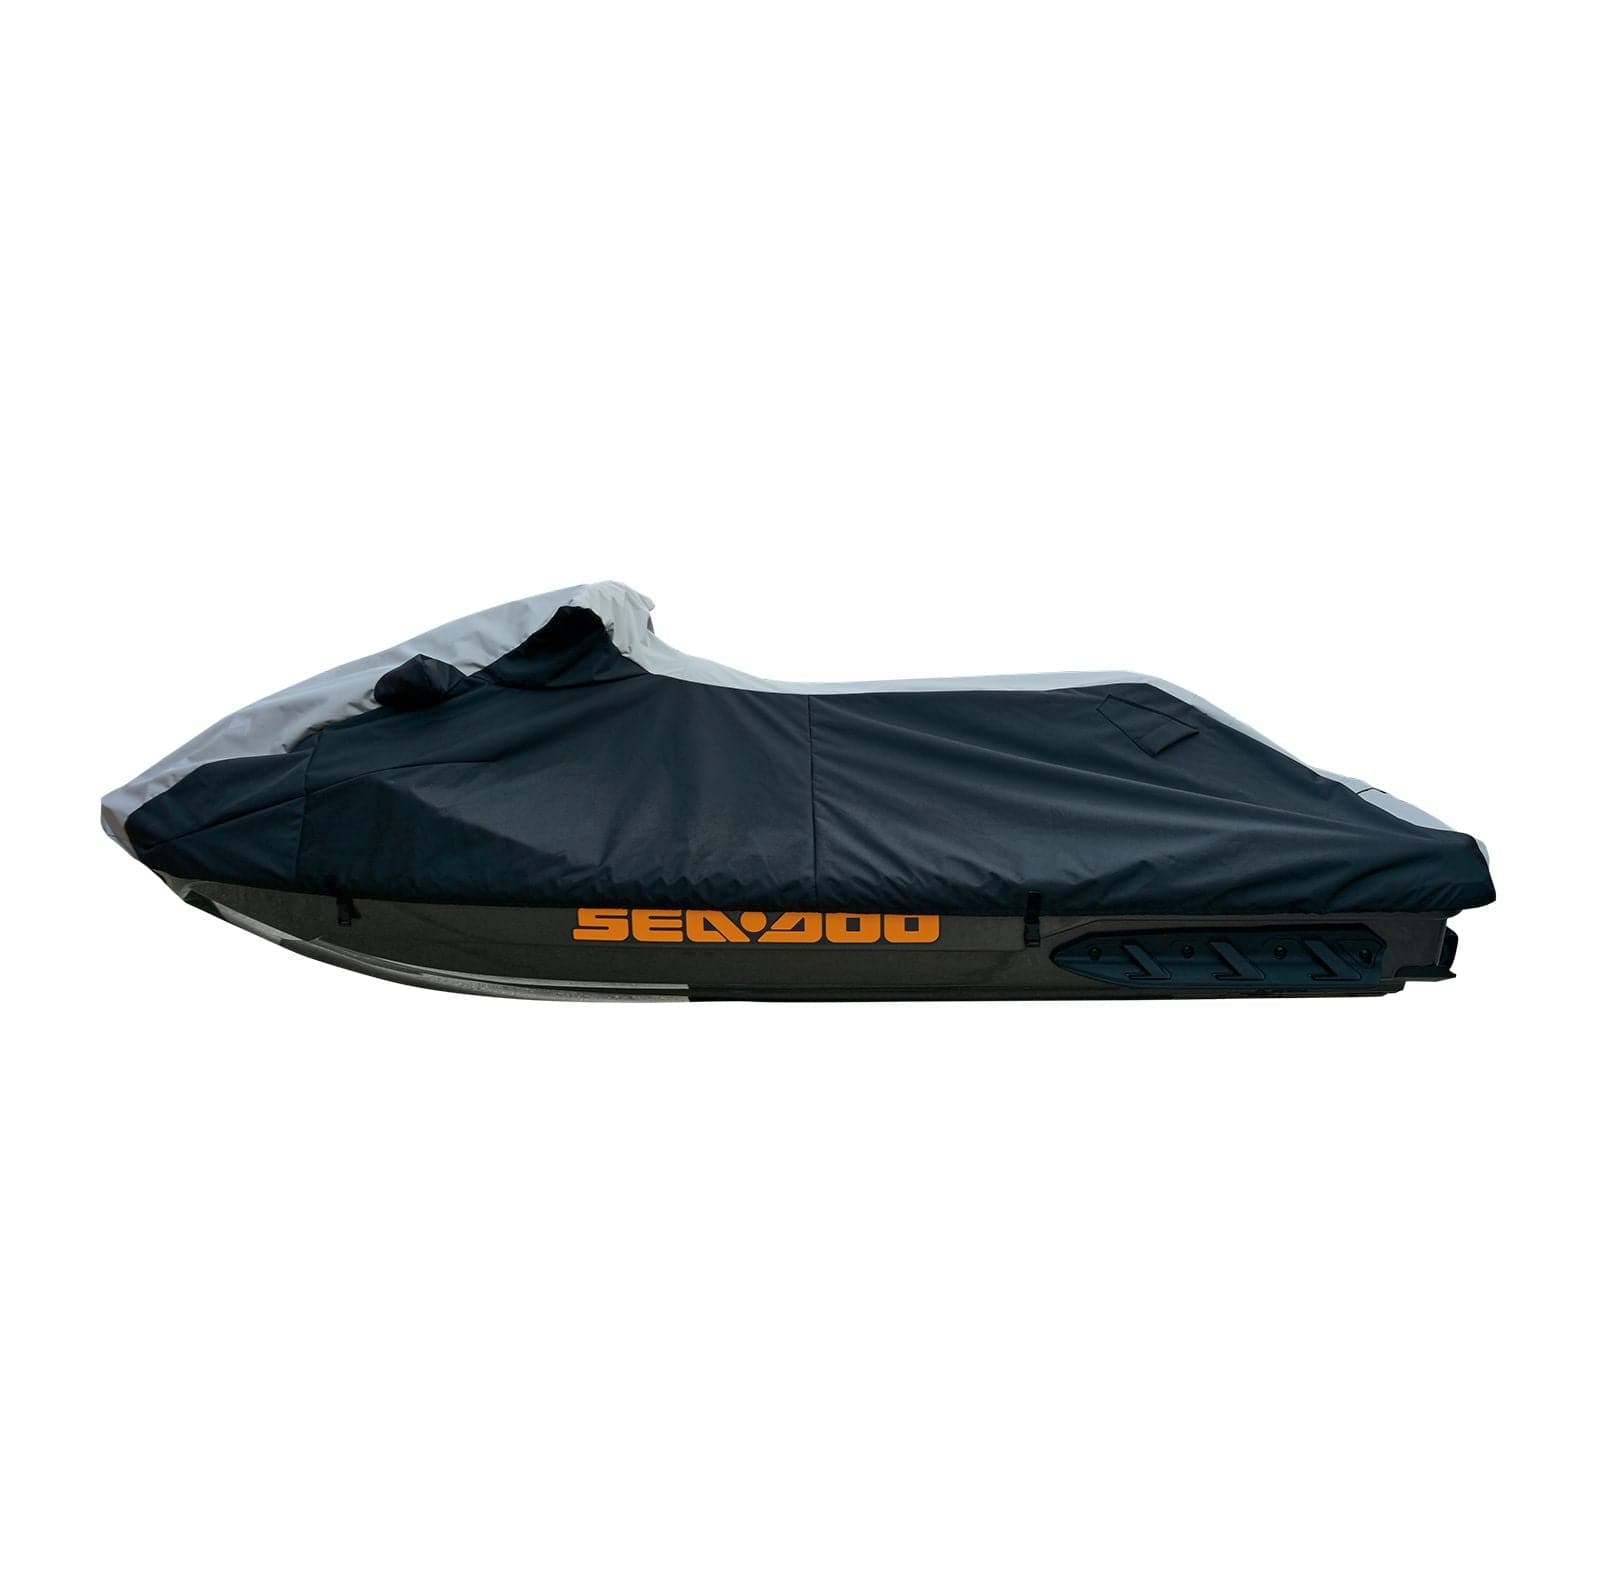 Trailerable Storage cover with vents for Sea-Doo 2000-2003 RX/ RX Di